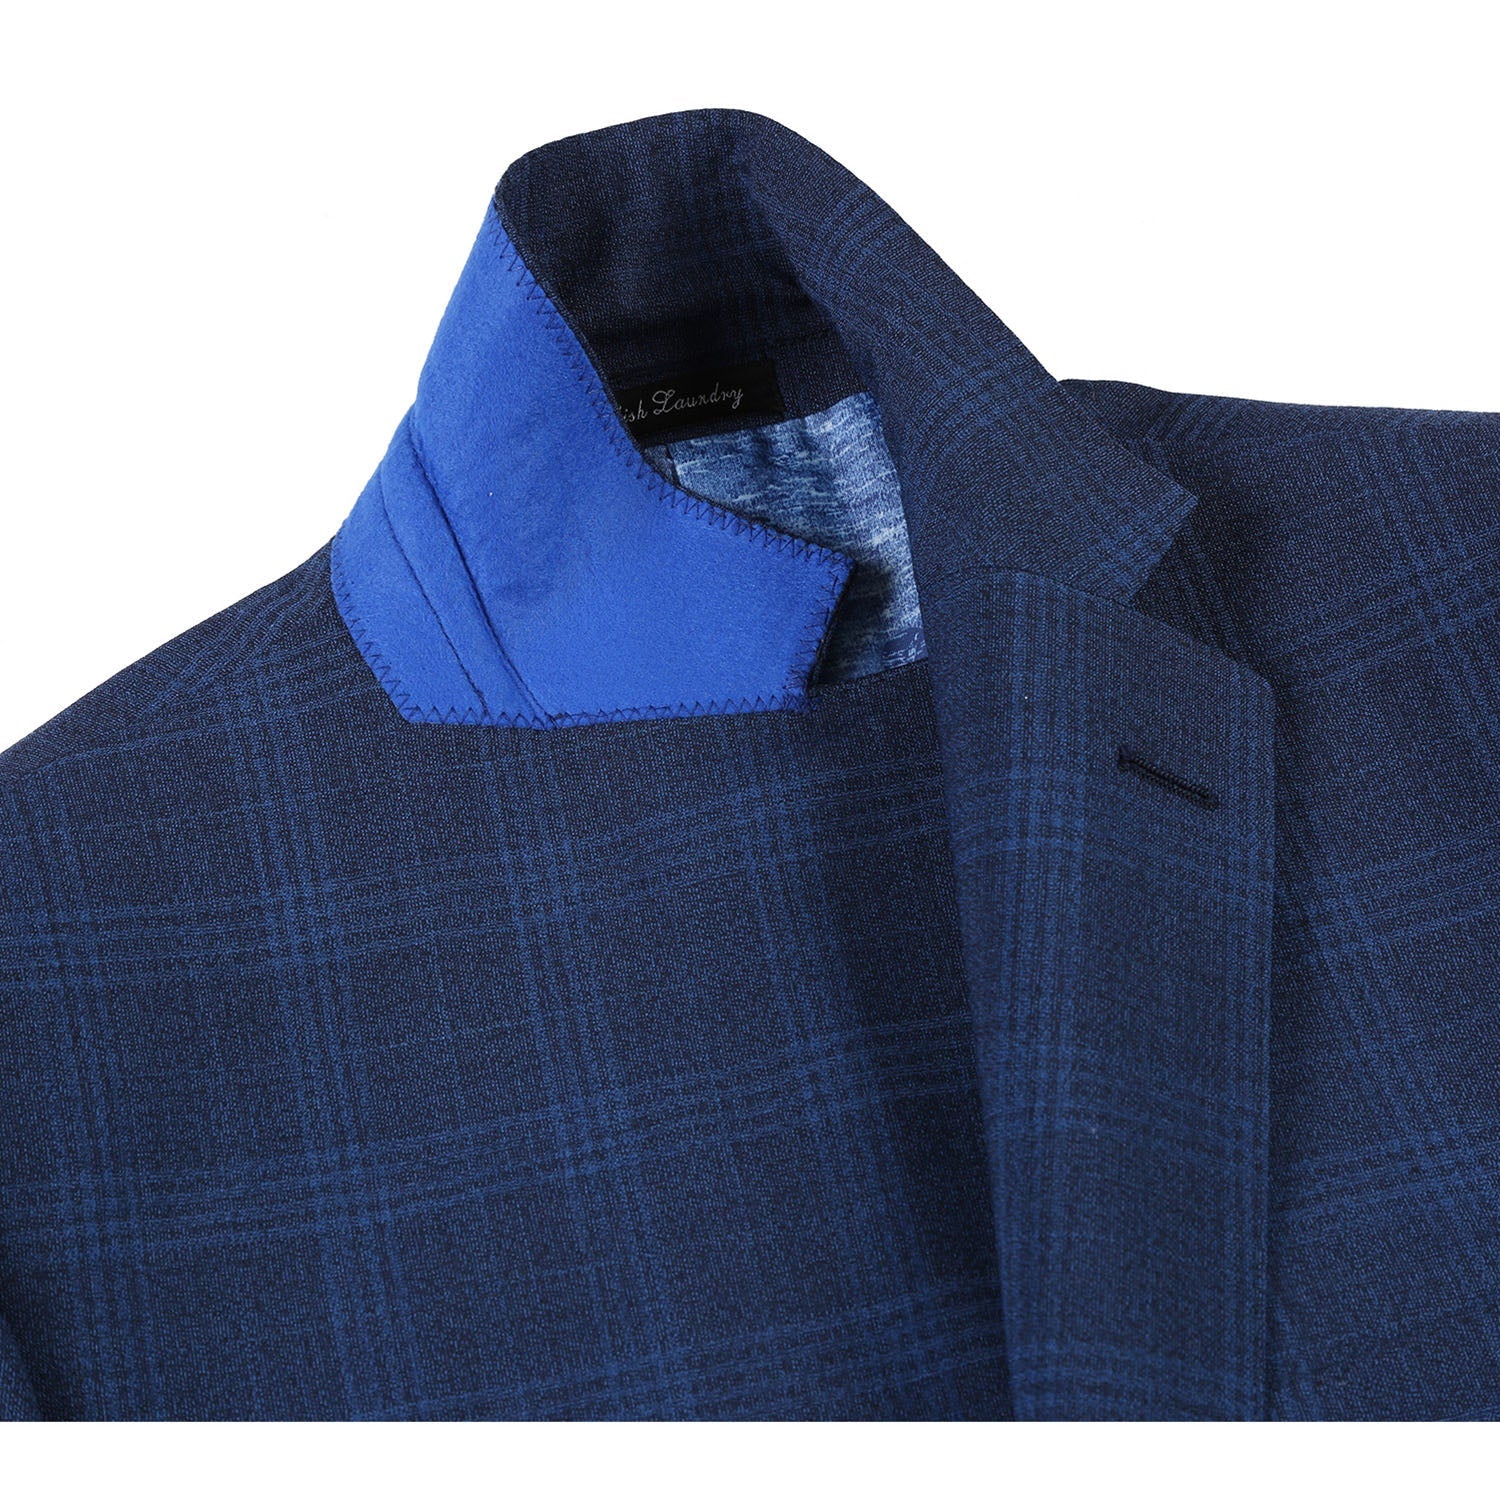 English Laundry Air Force Blue Plaid Wool Suit 5